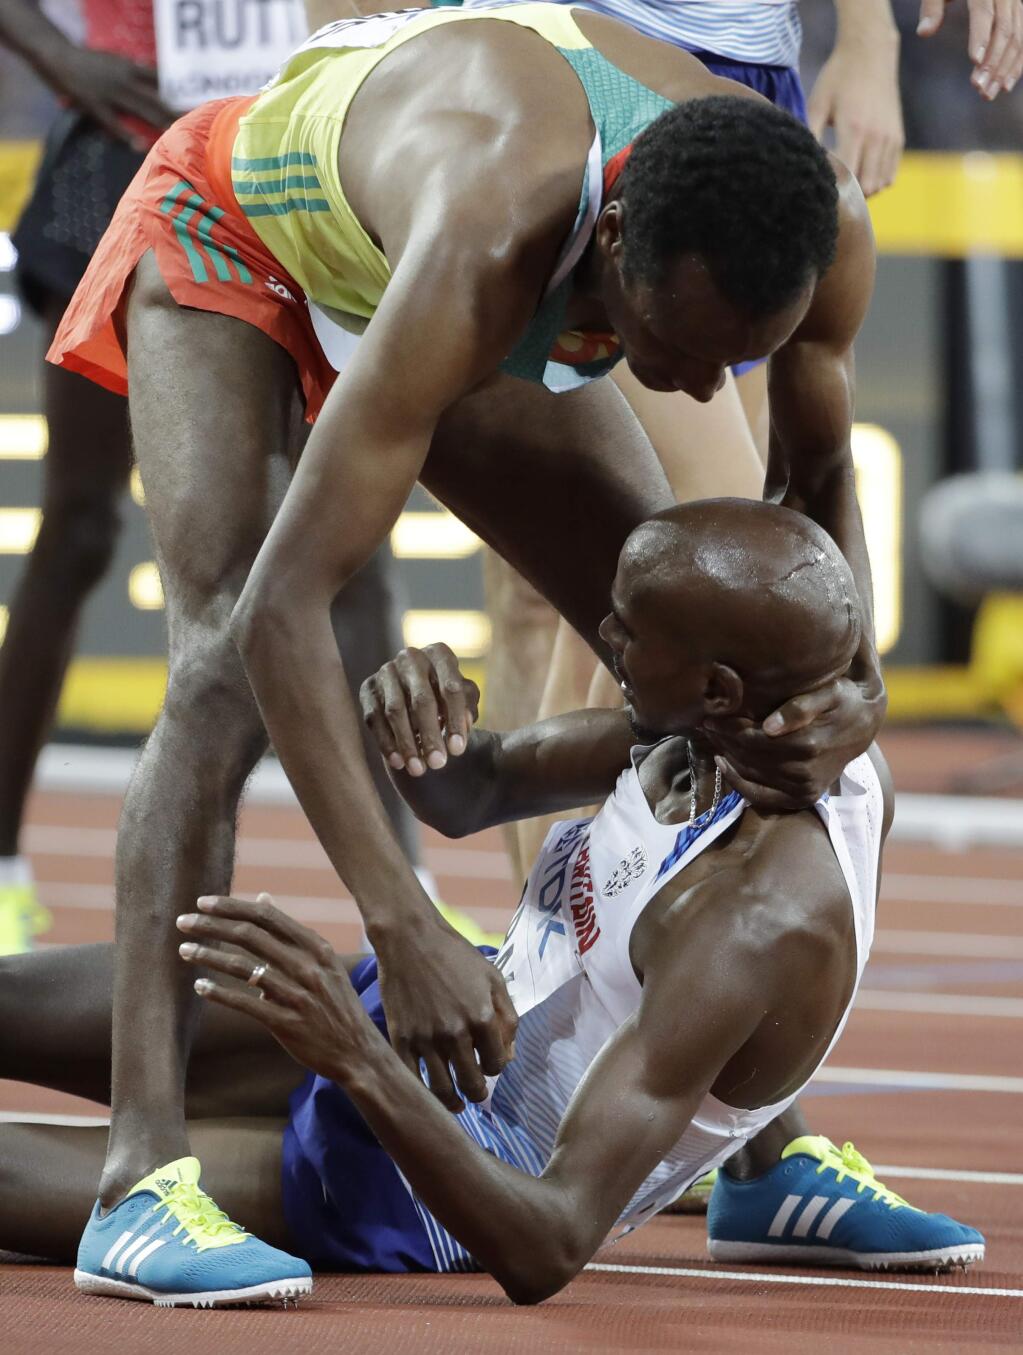 Ethiopia's Muktar Edris helps Britain's Mo Farah to his feet after winning gold in the Men's 5000m during the World Athletics Championships in London Saturday, Aug. 12, 2017. (AP Photo/David J. Phillip)